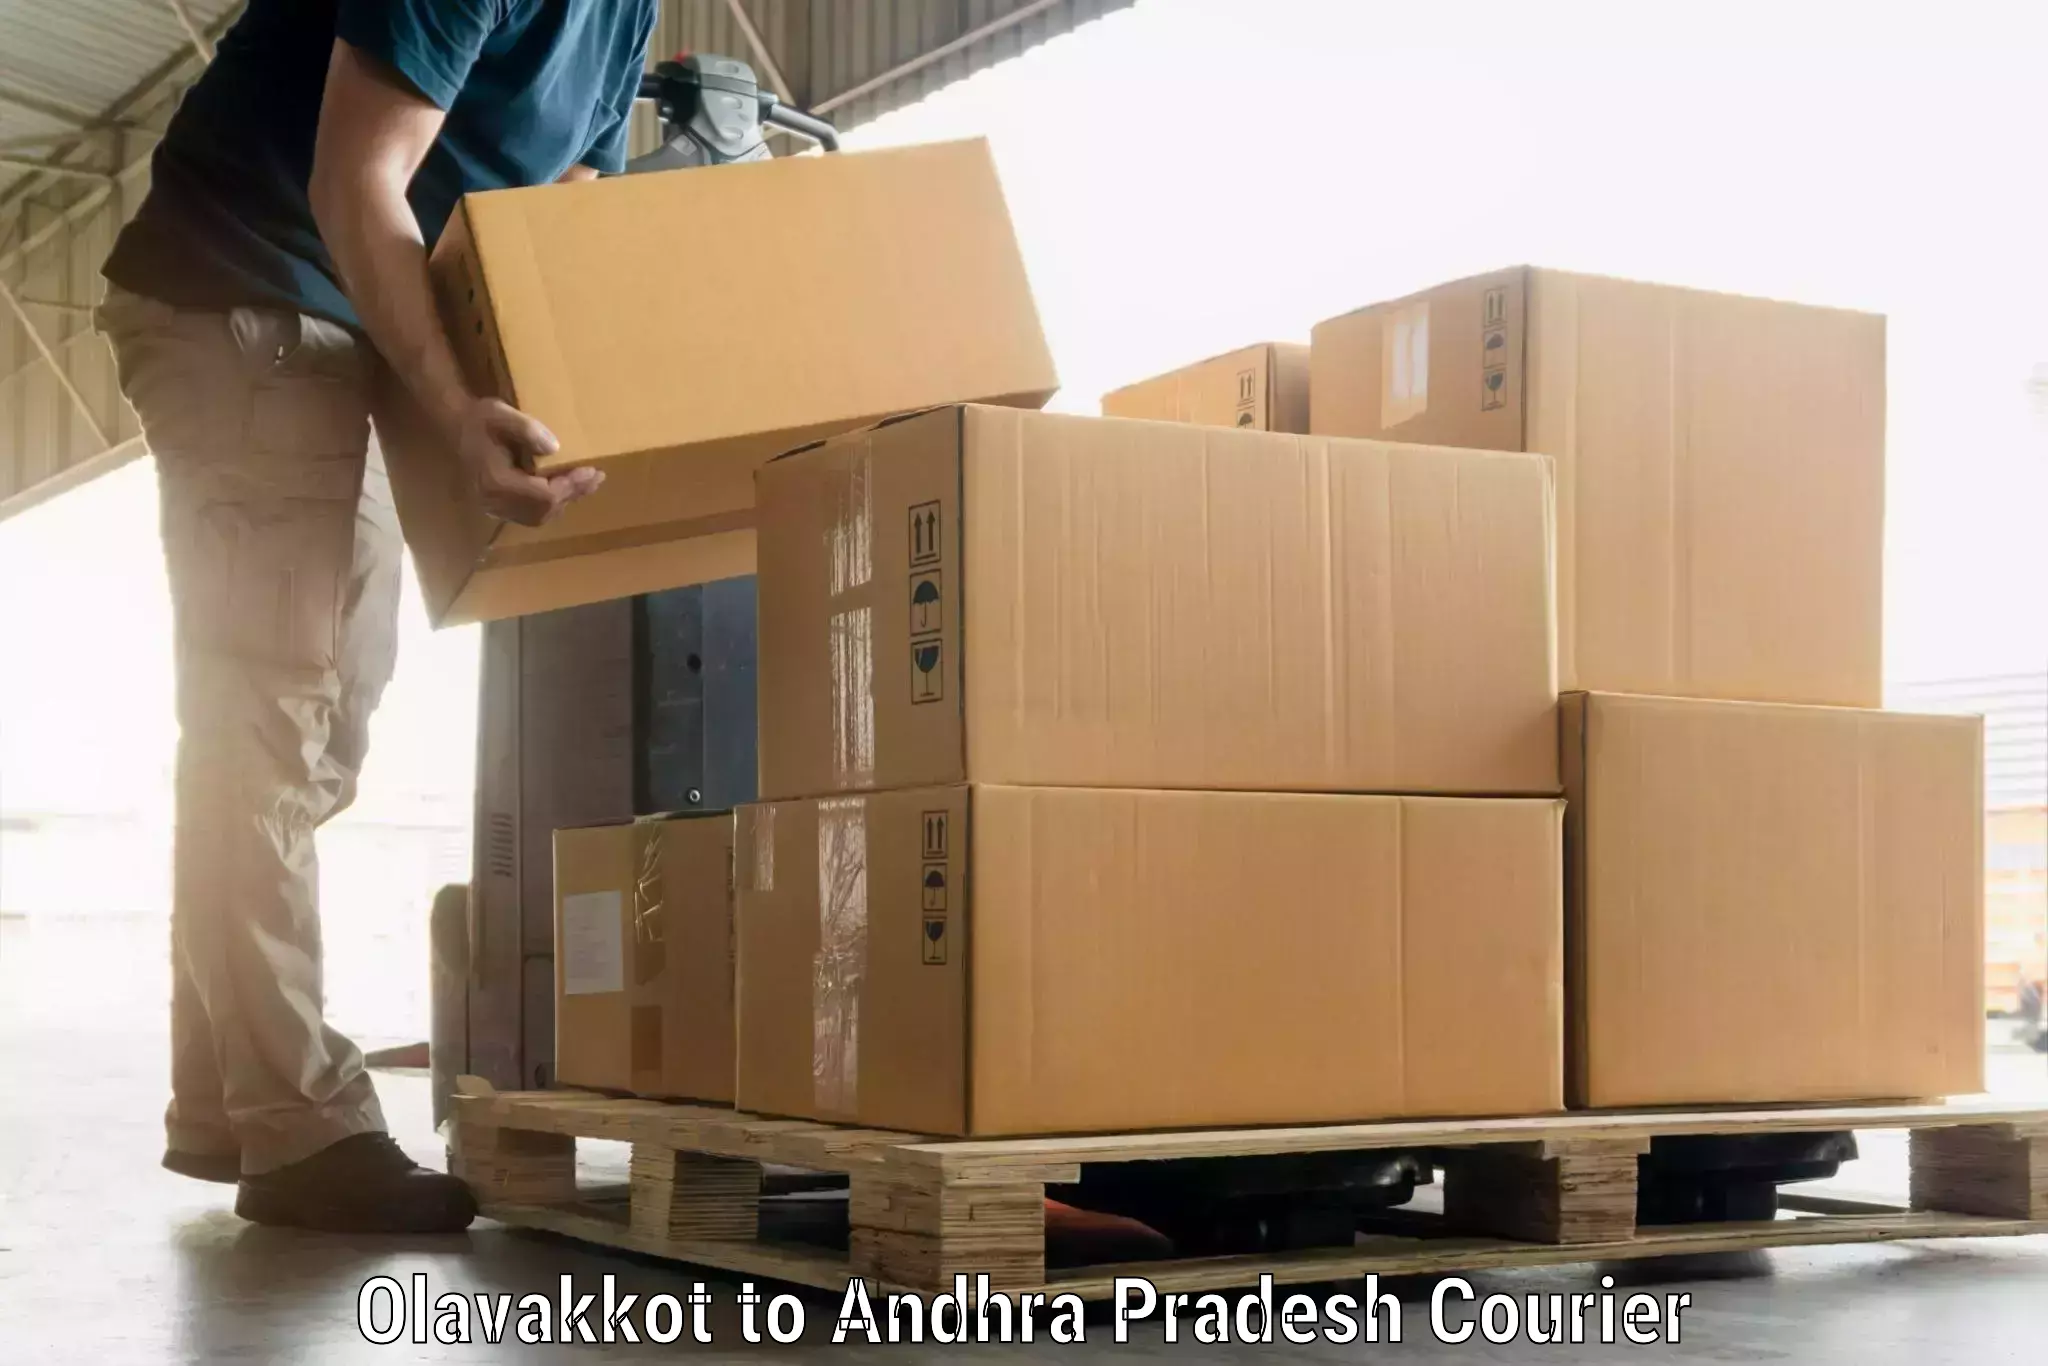 Baggage delivery technology Olavakkot to Visakhapatnam Port